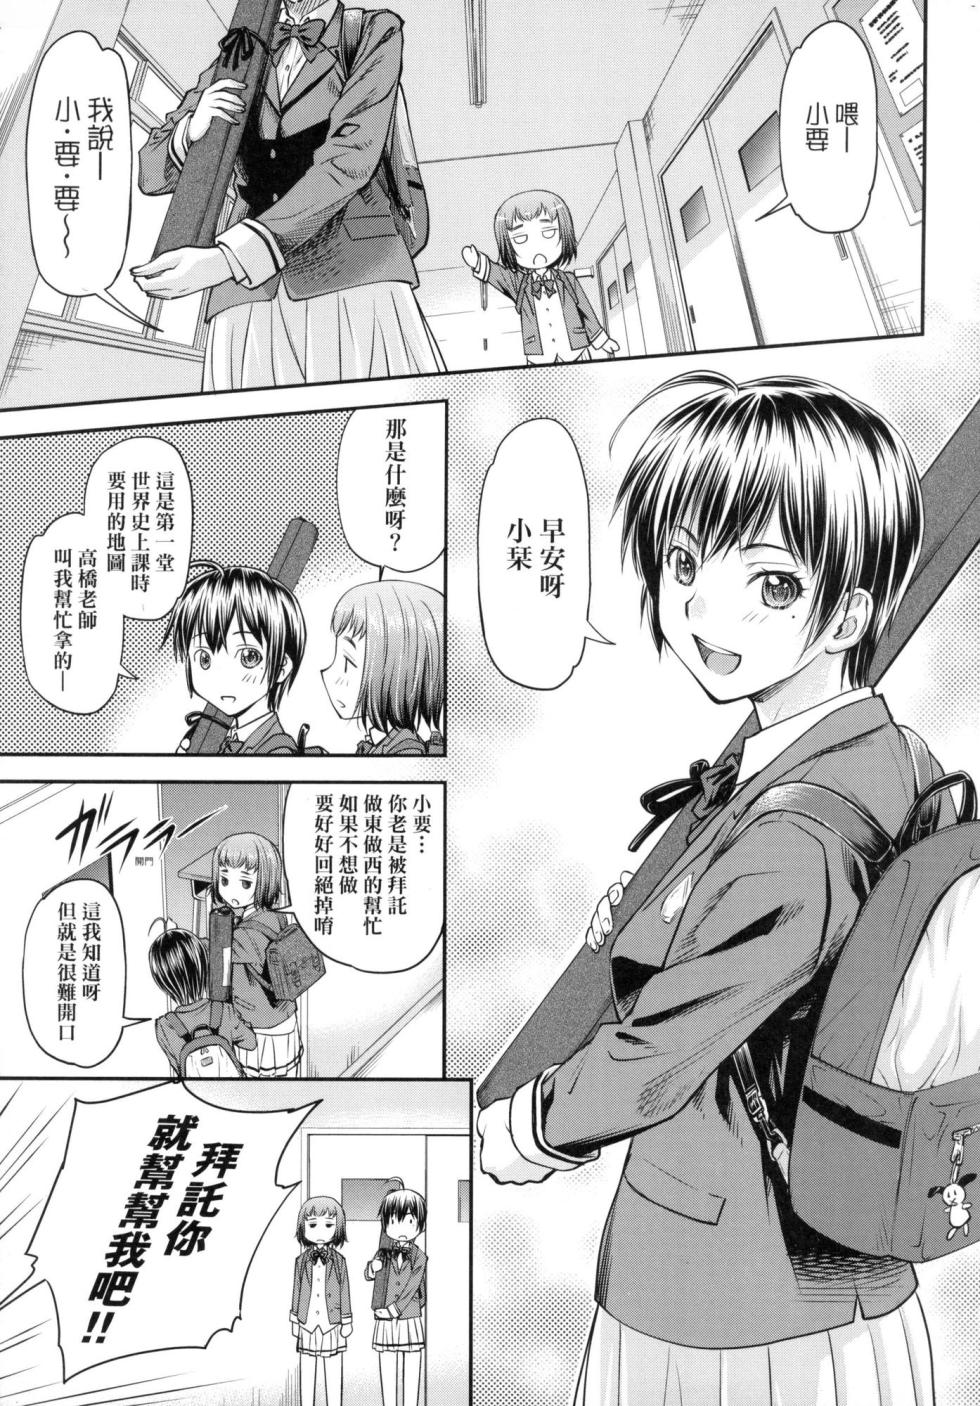 [Nagare Ippon] Kaname Date Jou | 小要開發Date 上 [Chinese] [Decensored] - Page 10